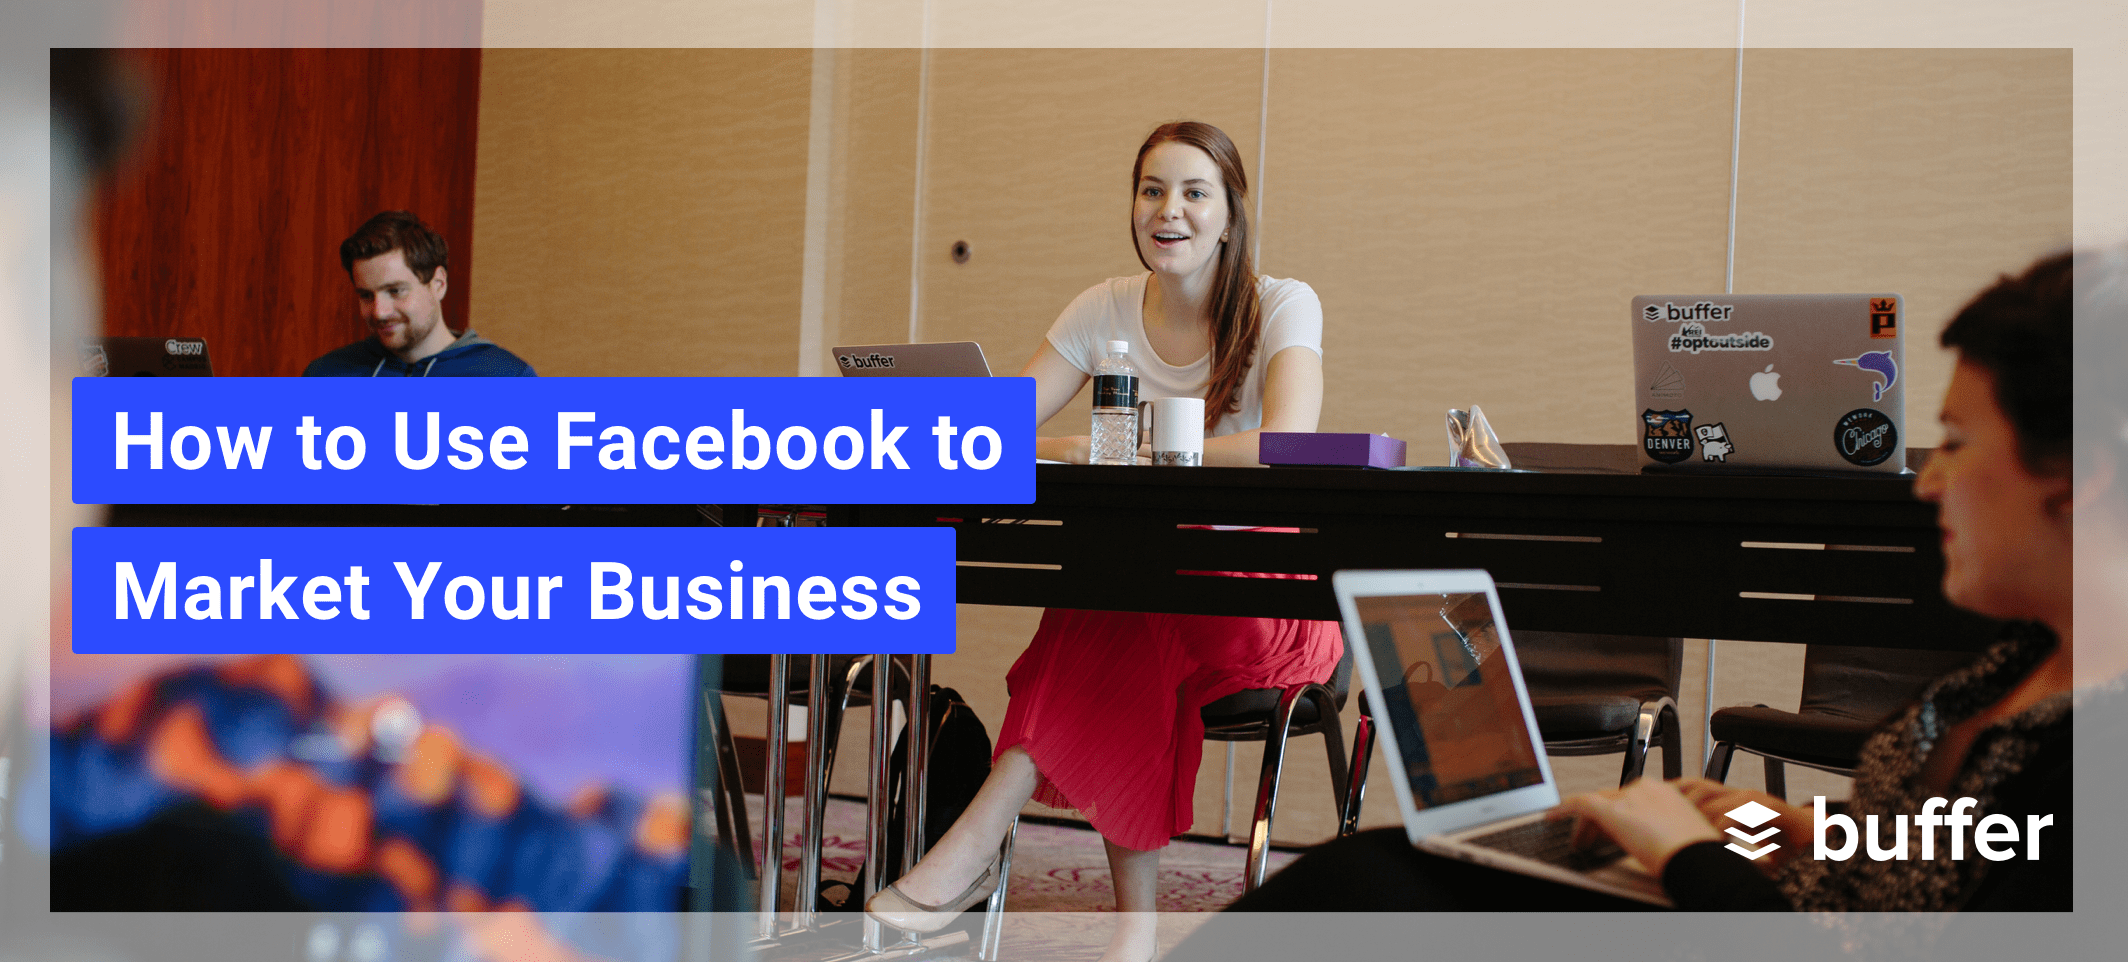 Facebook Marketing: How to Use Facebook to Market Your Business